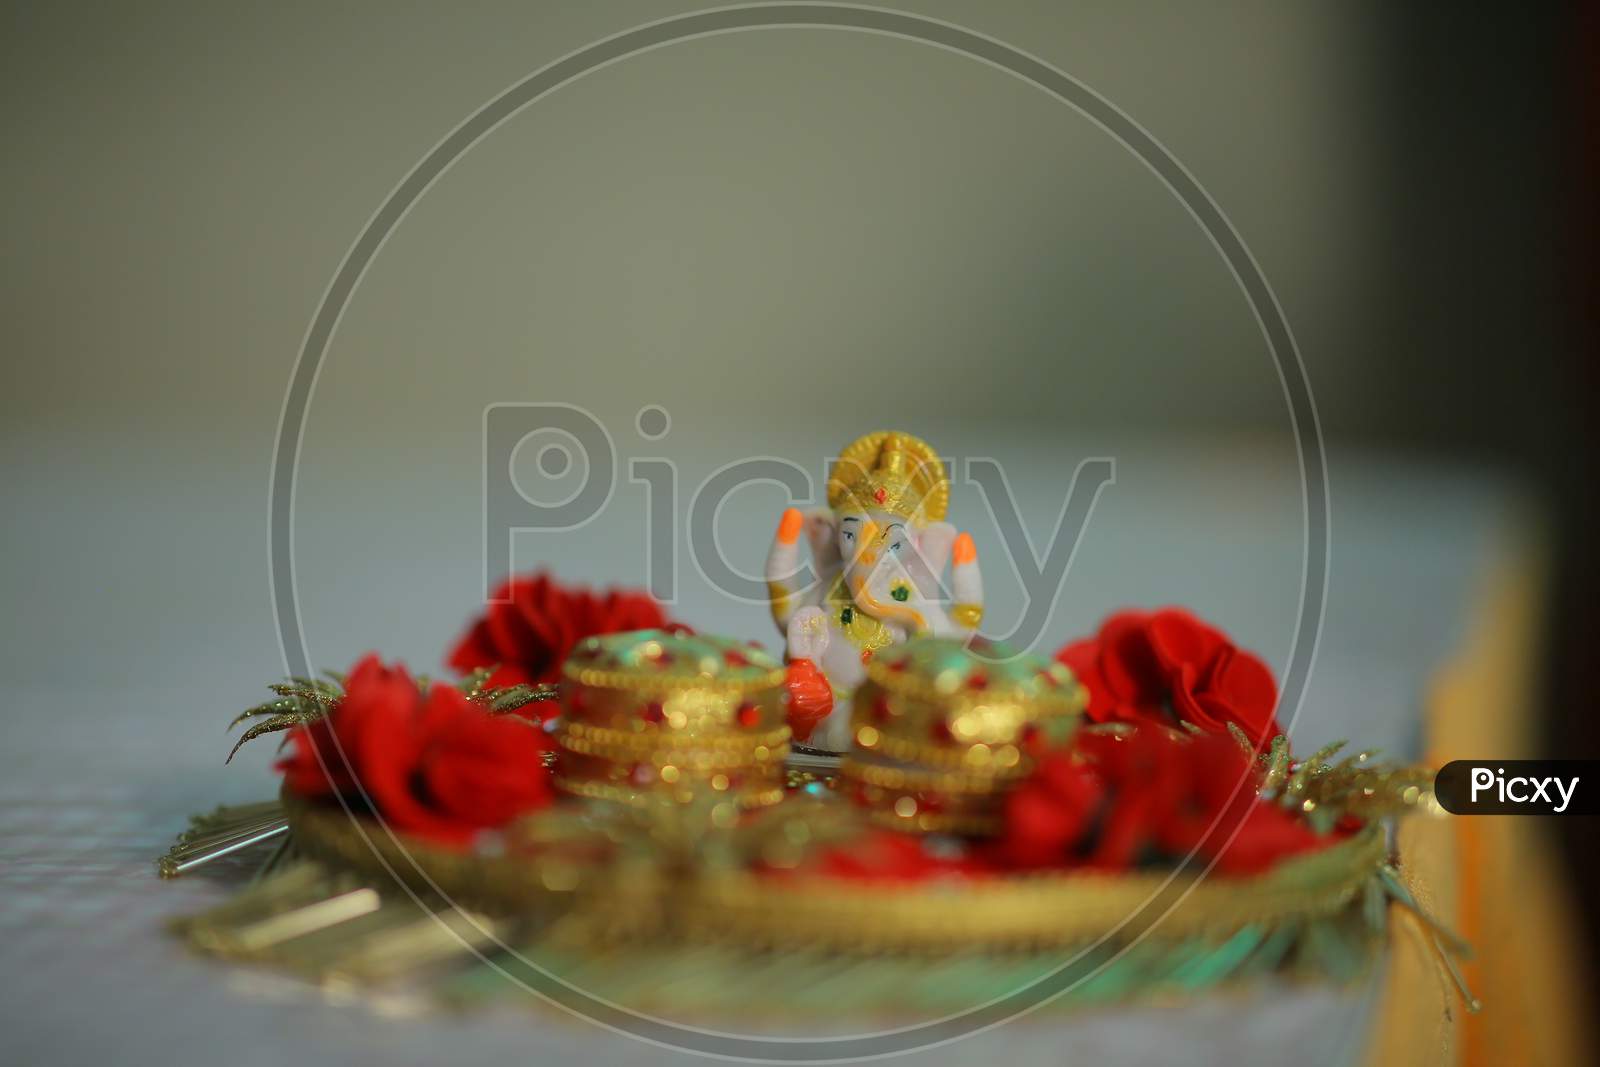 Indian Traditional Pooja Plates At An Hindu Wedding Ceremony